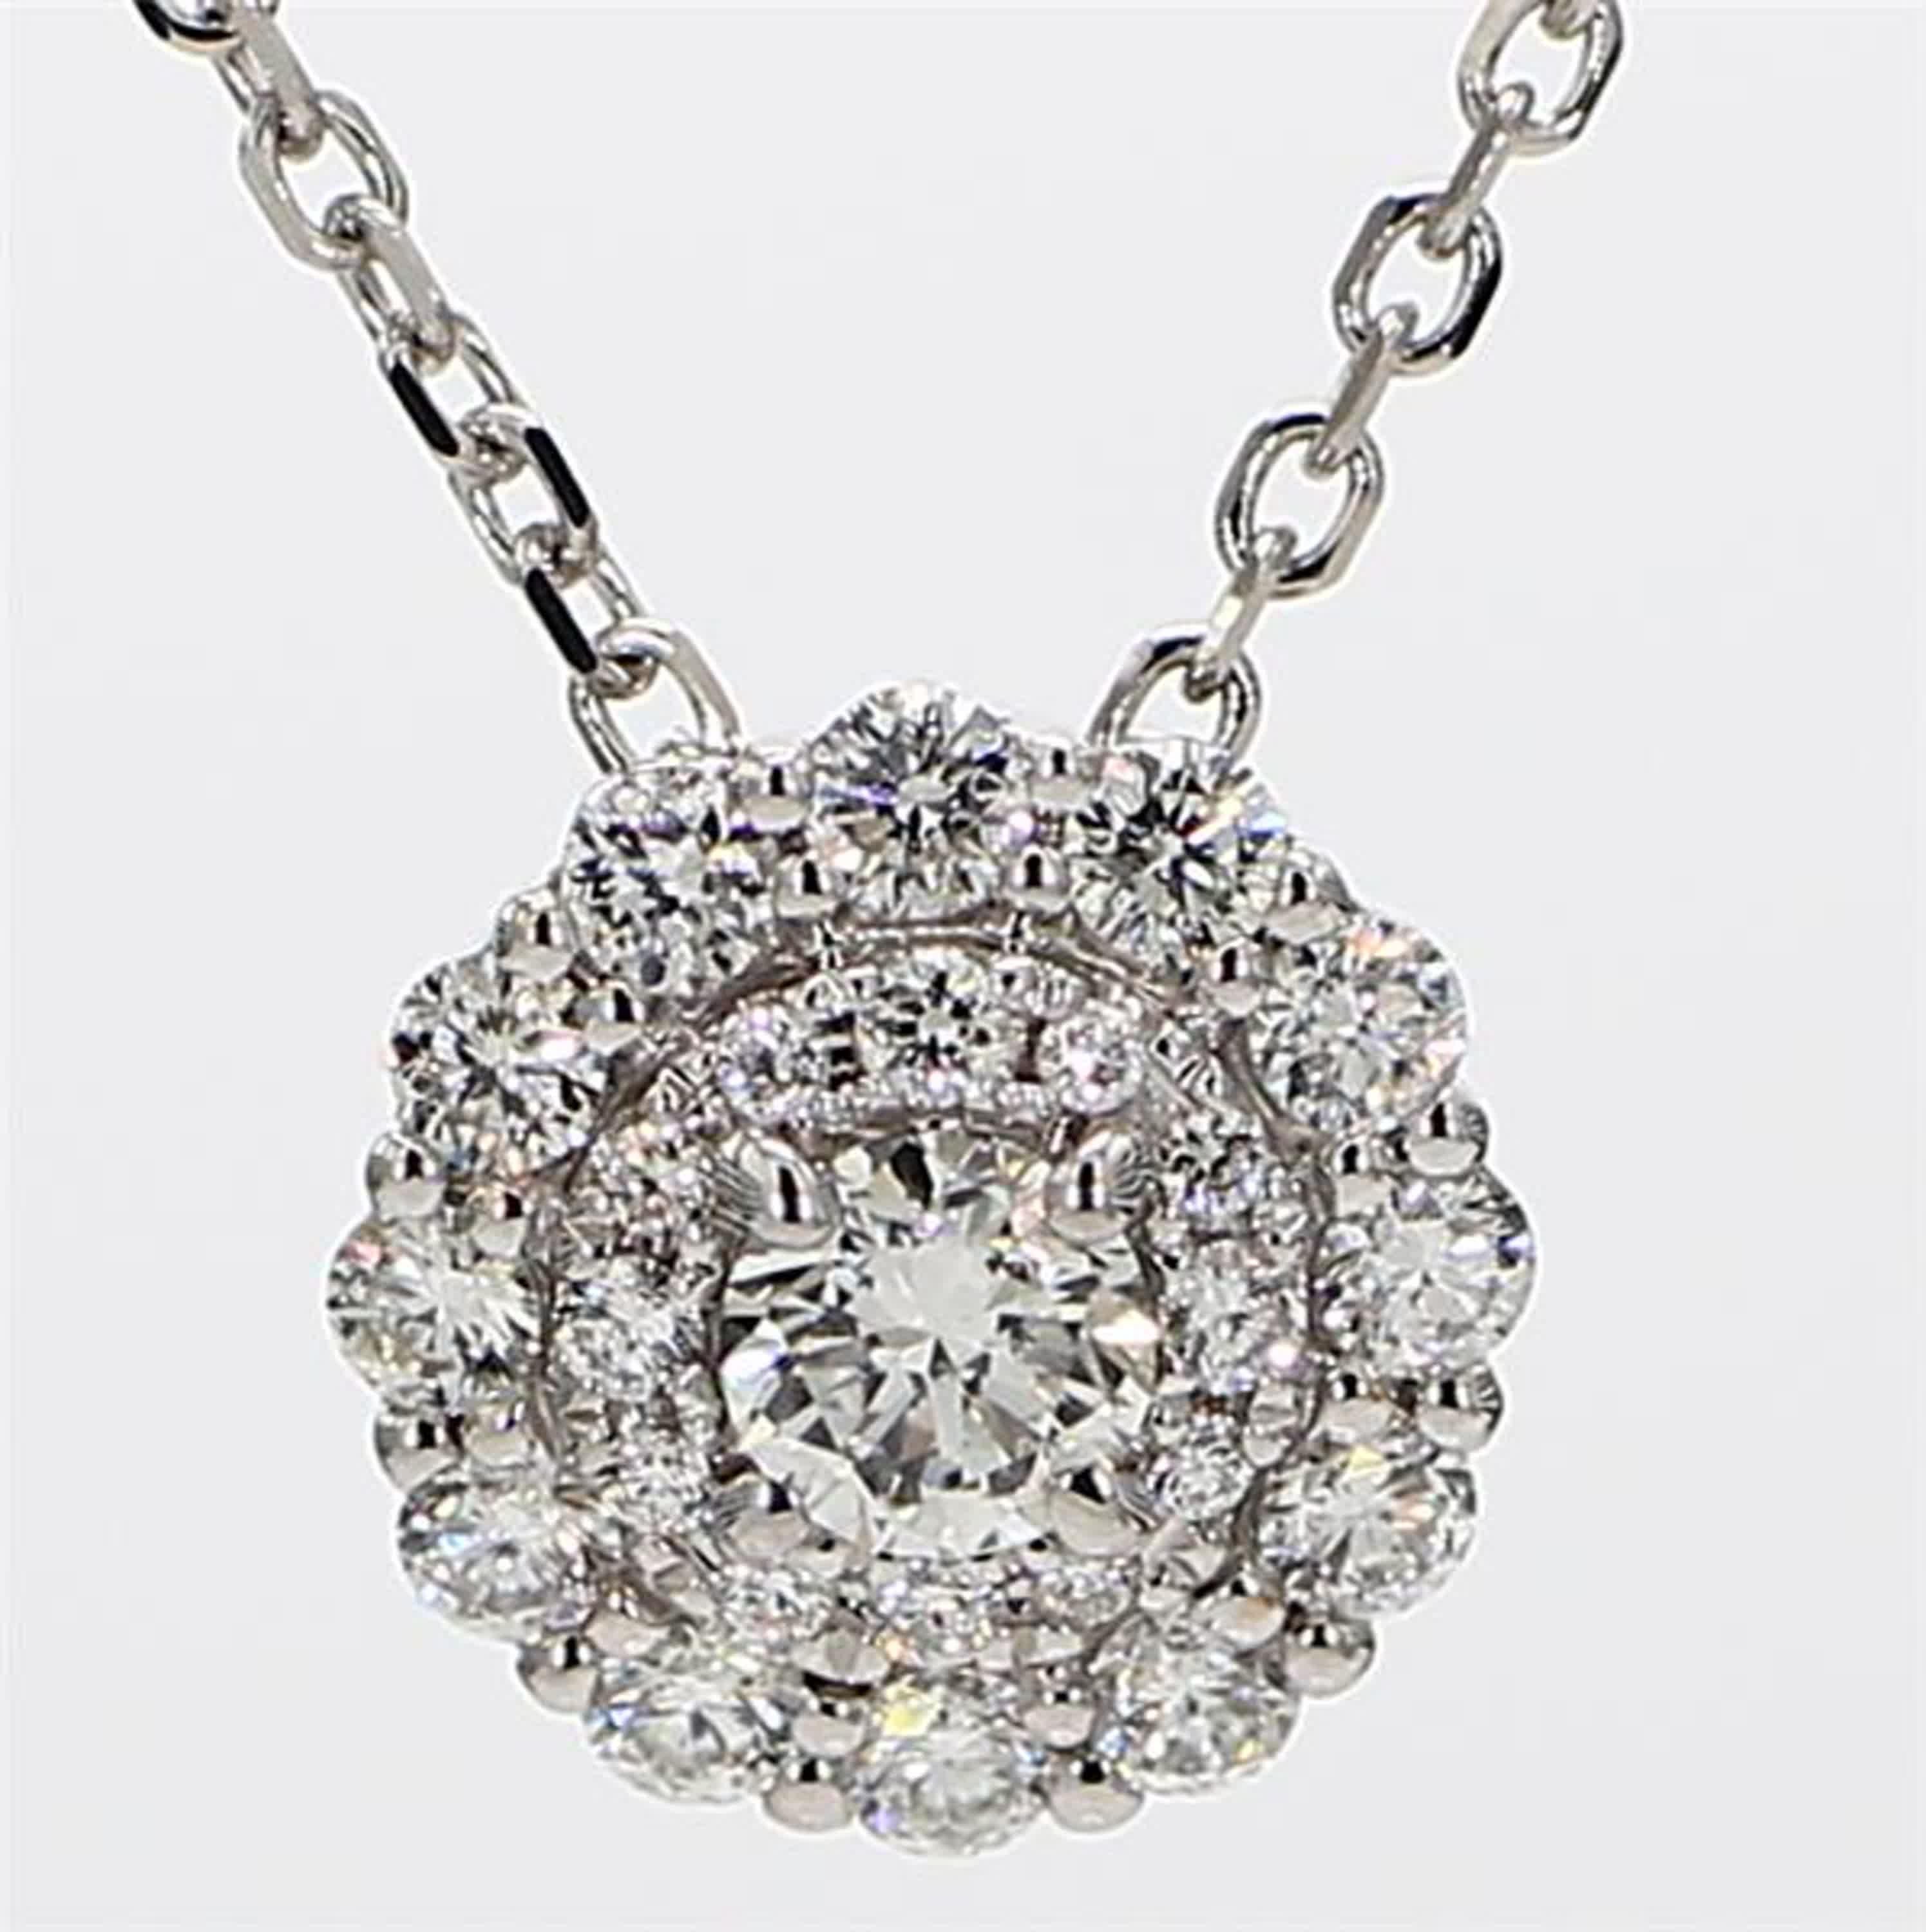 RareGemWorld's classic diamond pendant. Mounted in a beautiful 18K White Gold setting with natural round white diamonds. This pendant is guaranteed to impress and enhance your personal collection.

Total Weight: .72cts

Length x Width: 10.6 x 10.6